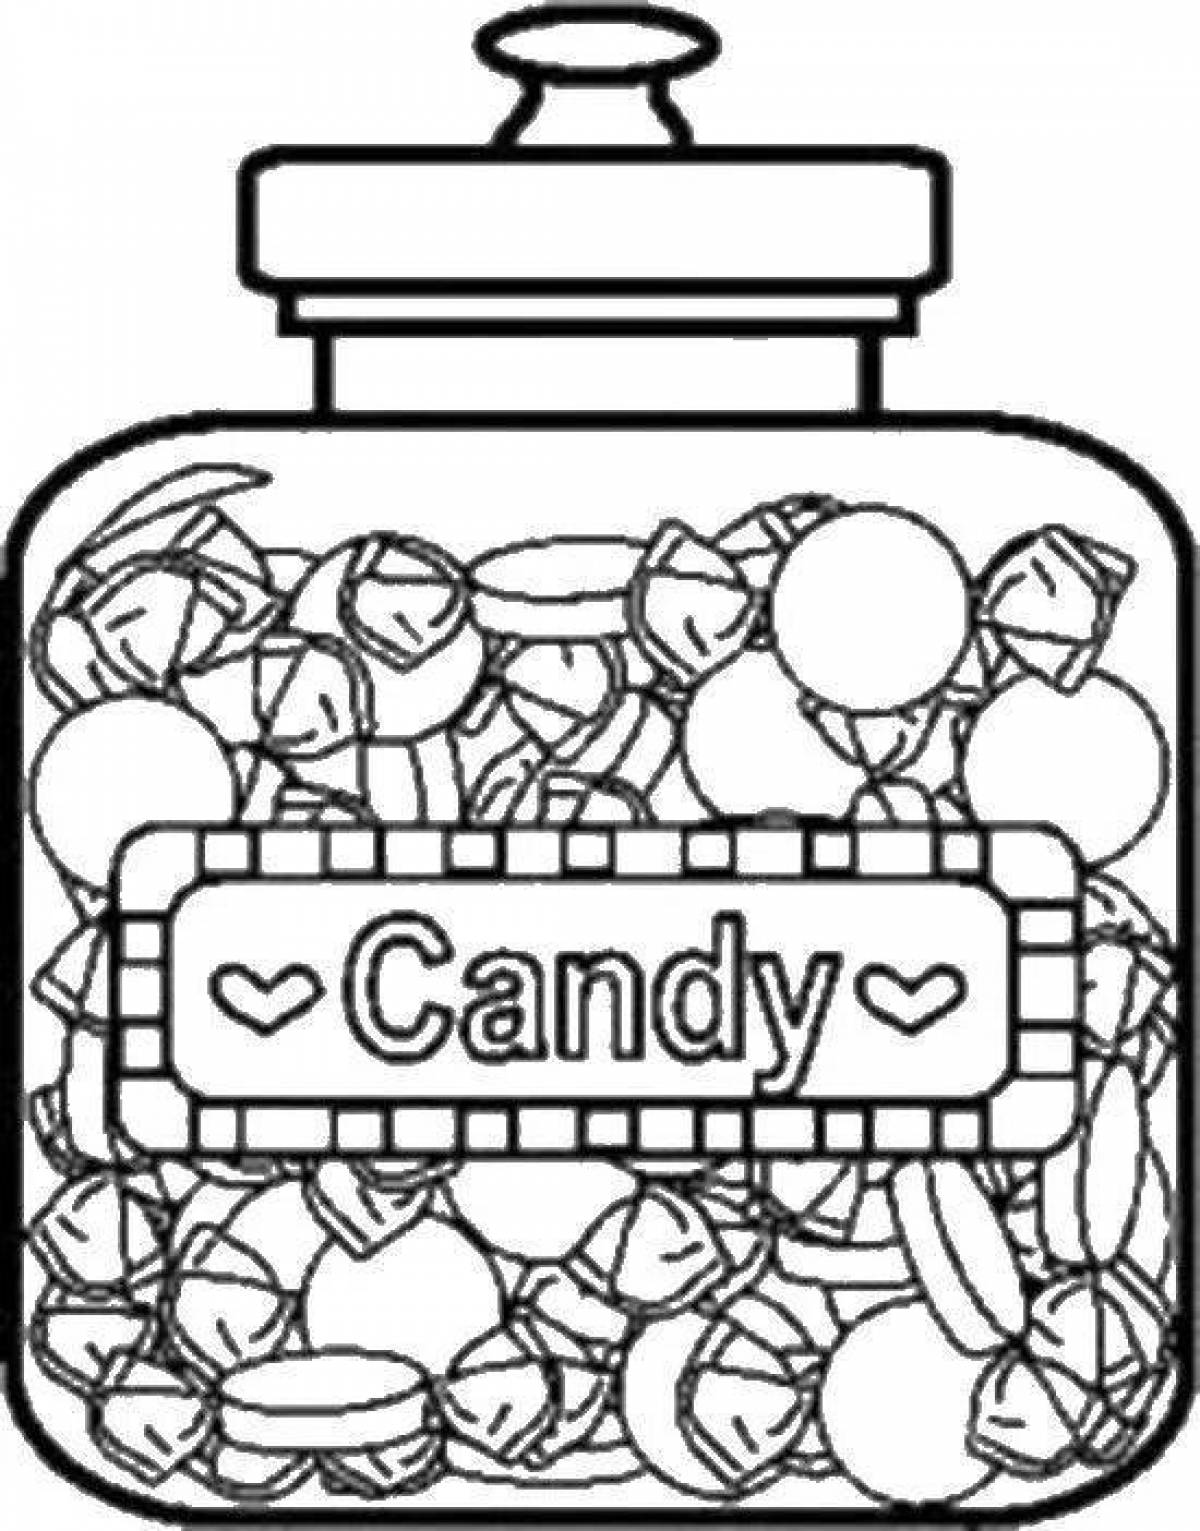 Coloring page marmalade with colored filling